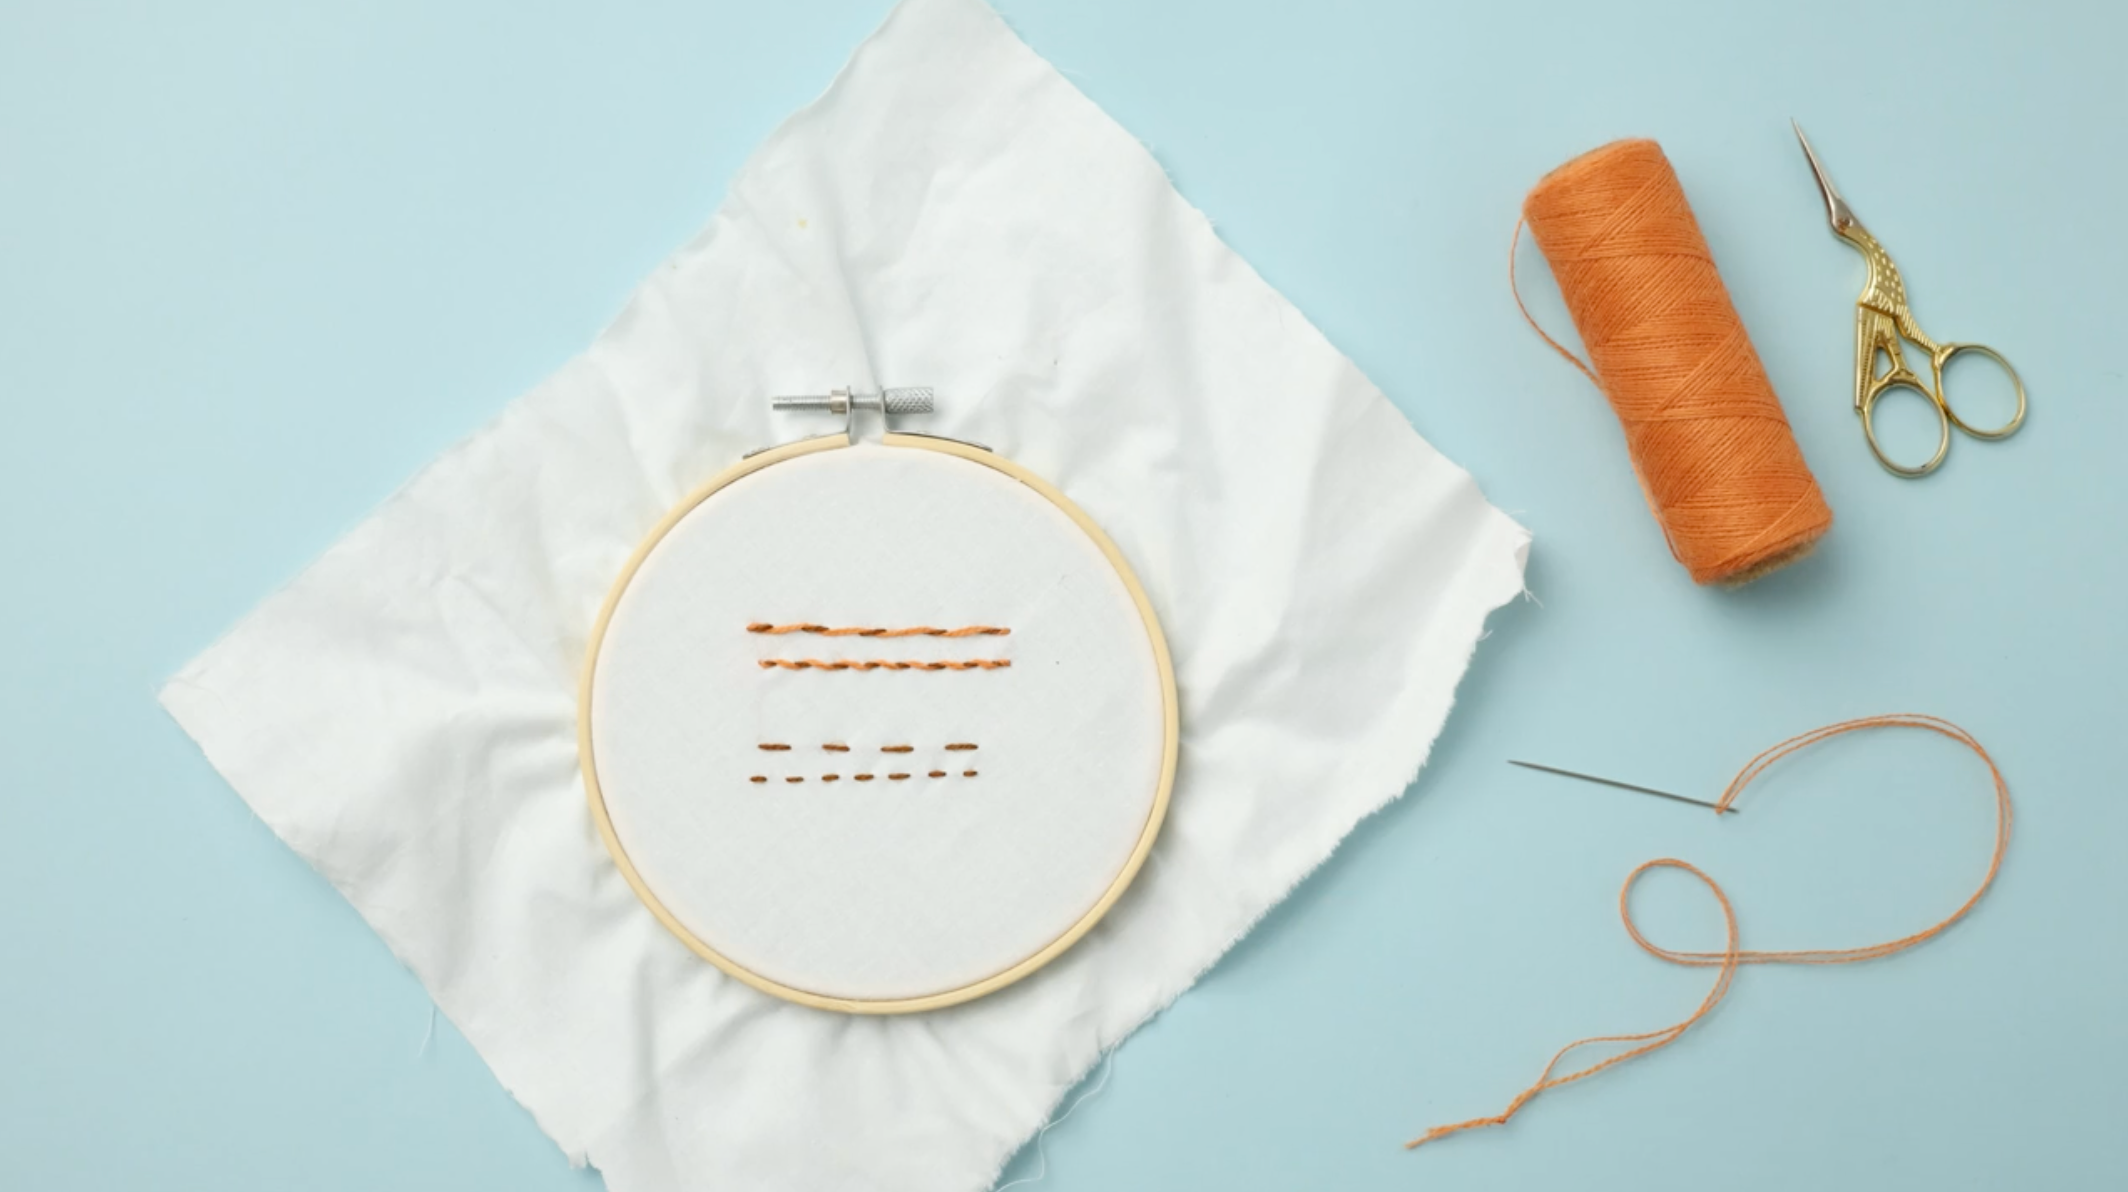 Running Whip Stitch Tutorial: Step-By-Step Embroidery Instructions